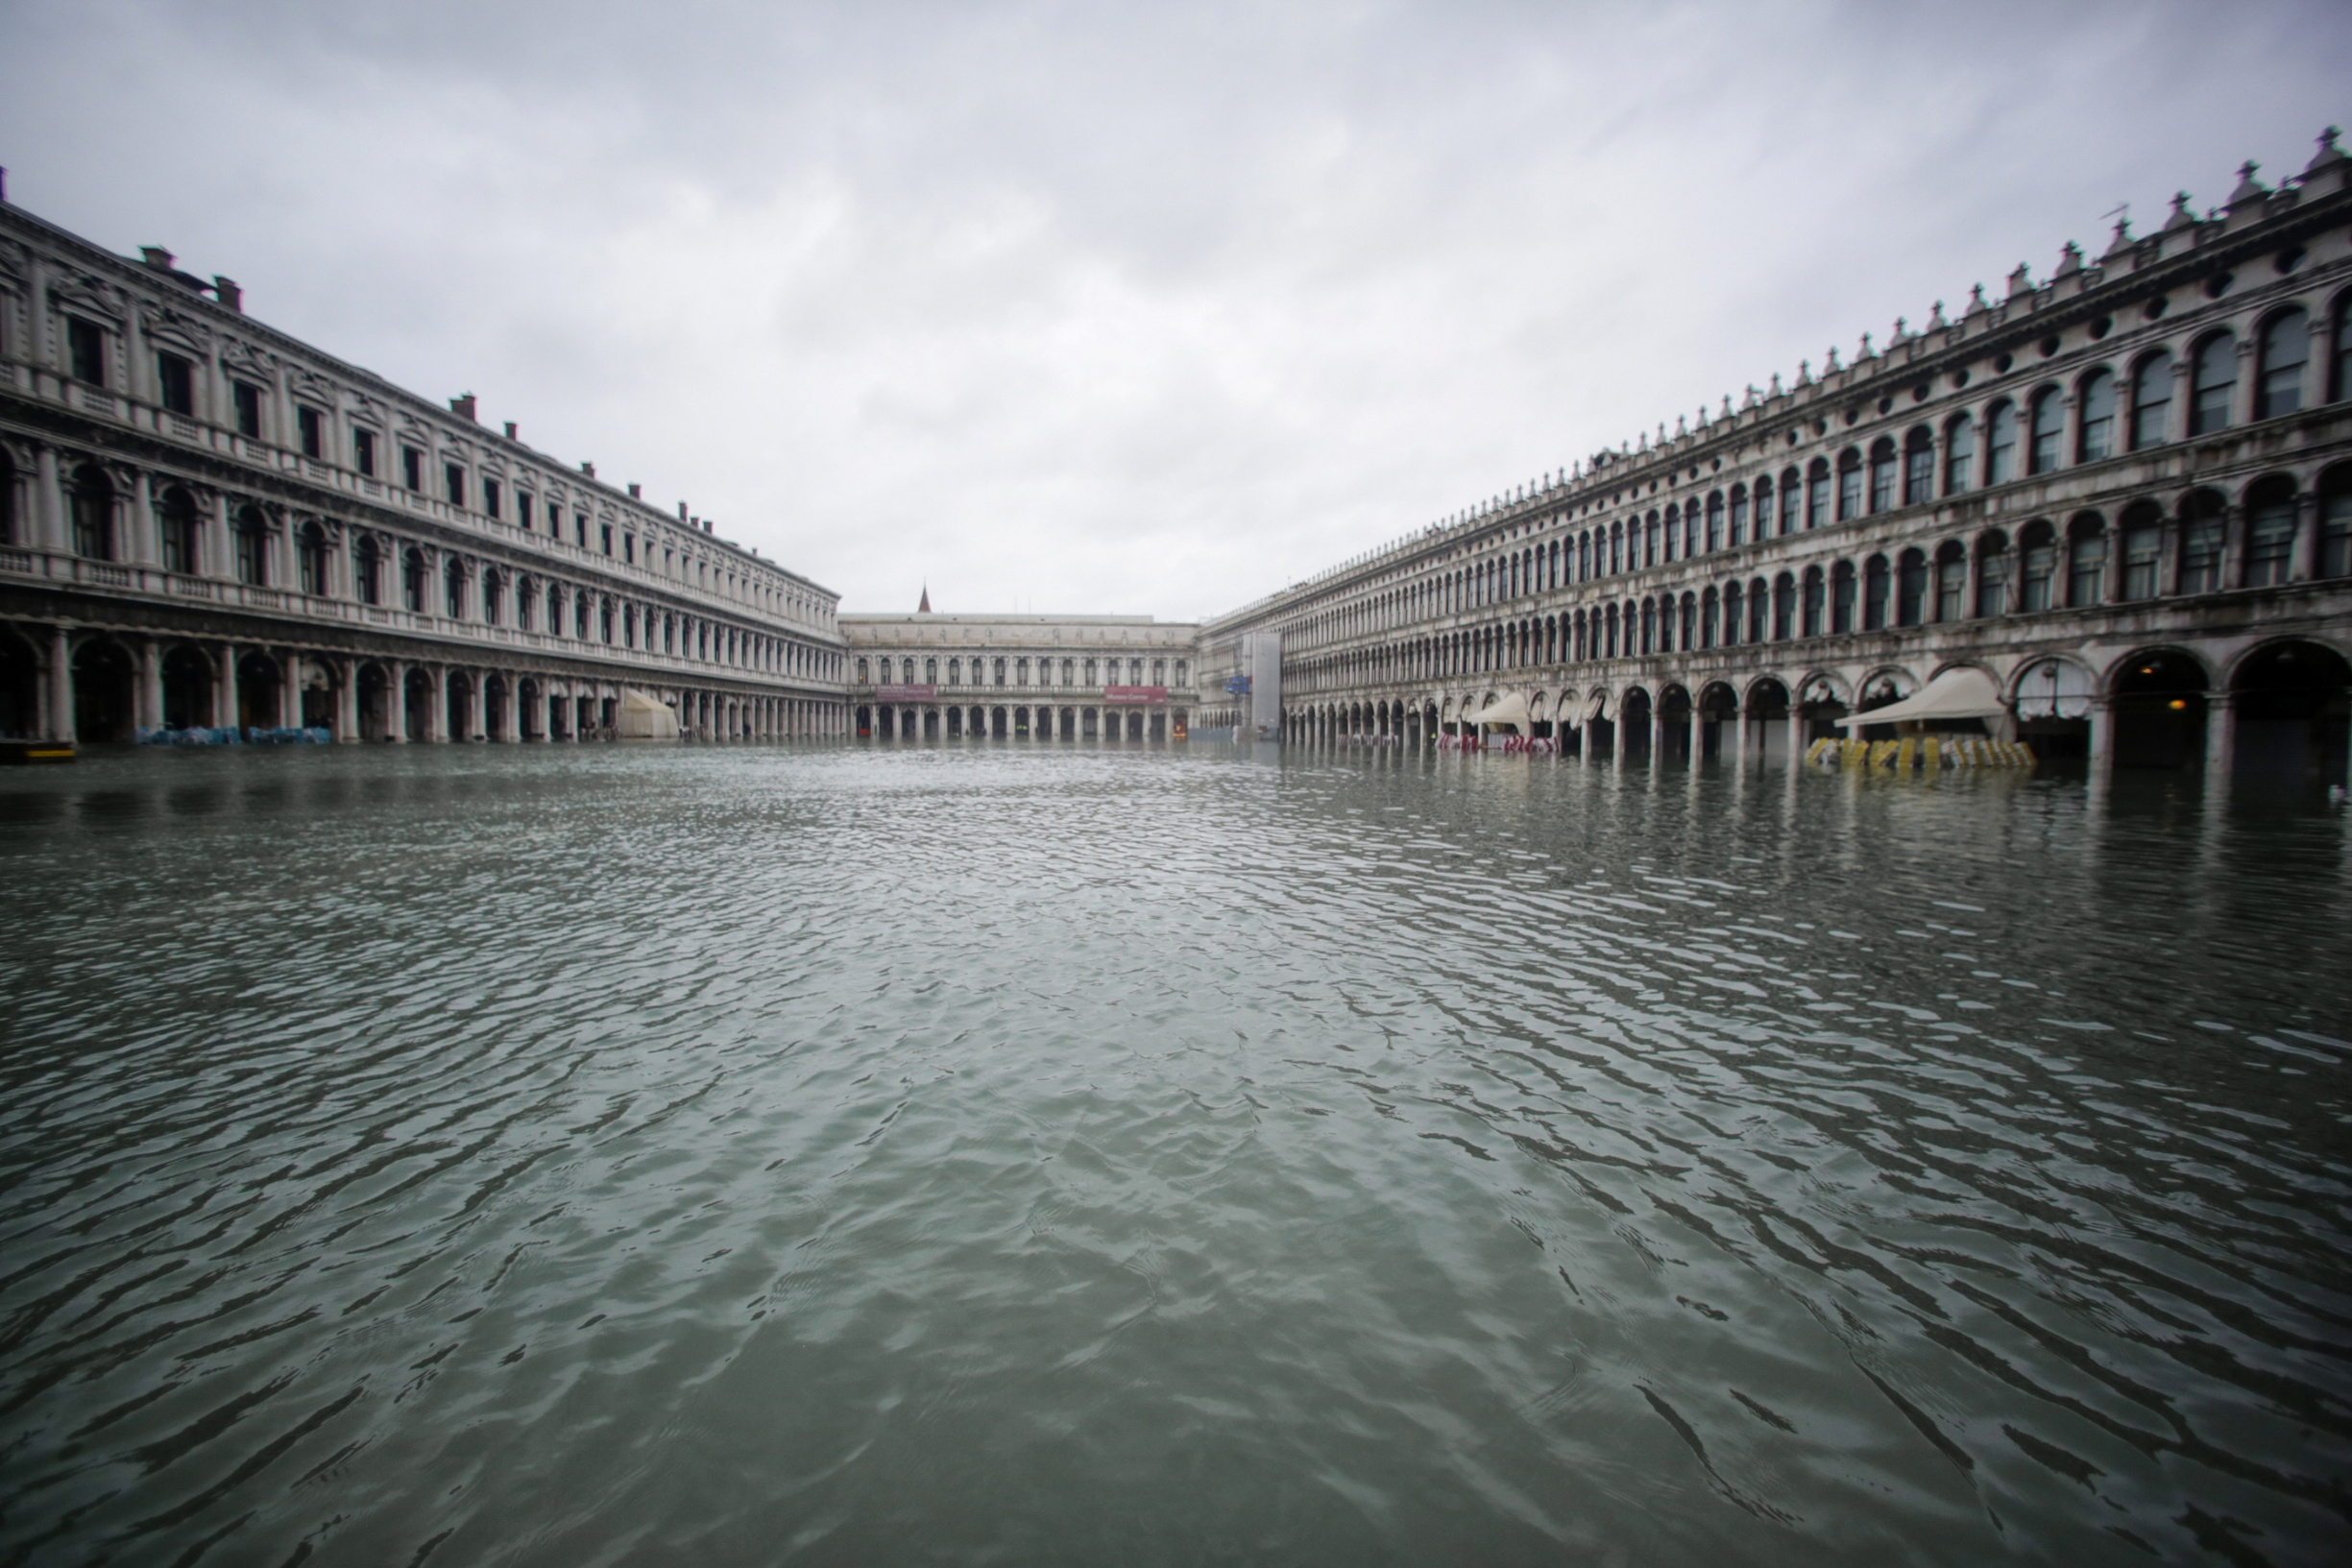 Flood in Venice, a view of St. Mark square ,Venice, ITALY-17-11-2019, Image: 483513040, License: Rights-managed, Restrictions: UK and ITALY OUT - Fee Payable Upon Reproduction - For queries contact Avalon.red - sales@avalon.red London: +44 (0) 20 7421 6000 Los Angeles: +1 (310) 822 0419 Berlin: +49 (0) 30 76 212 251, Model Release: no, Credit line: Avalon.red / Avalon Editorial / Profimedia